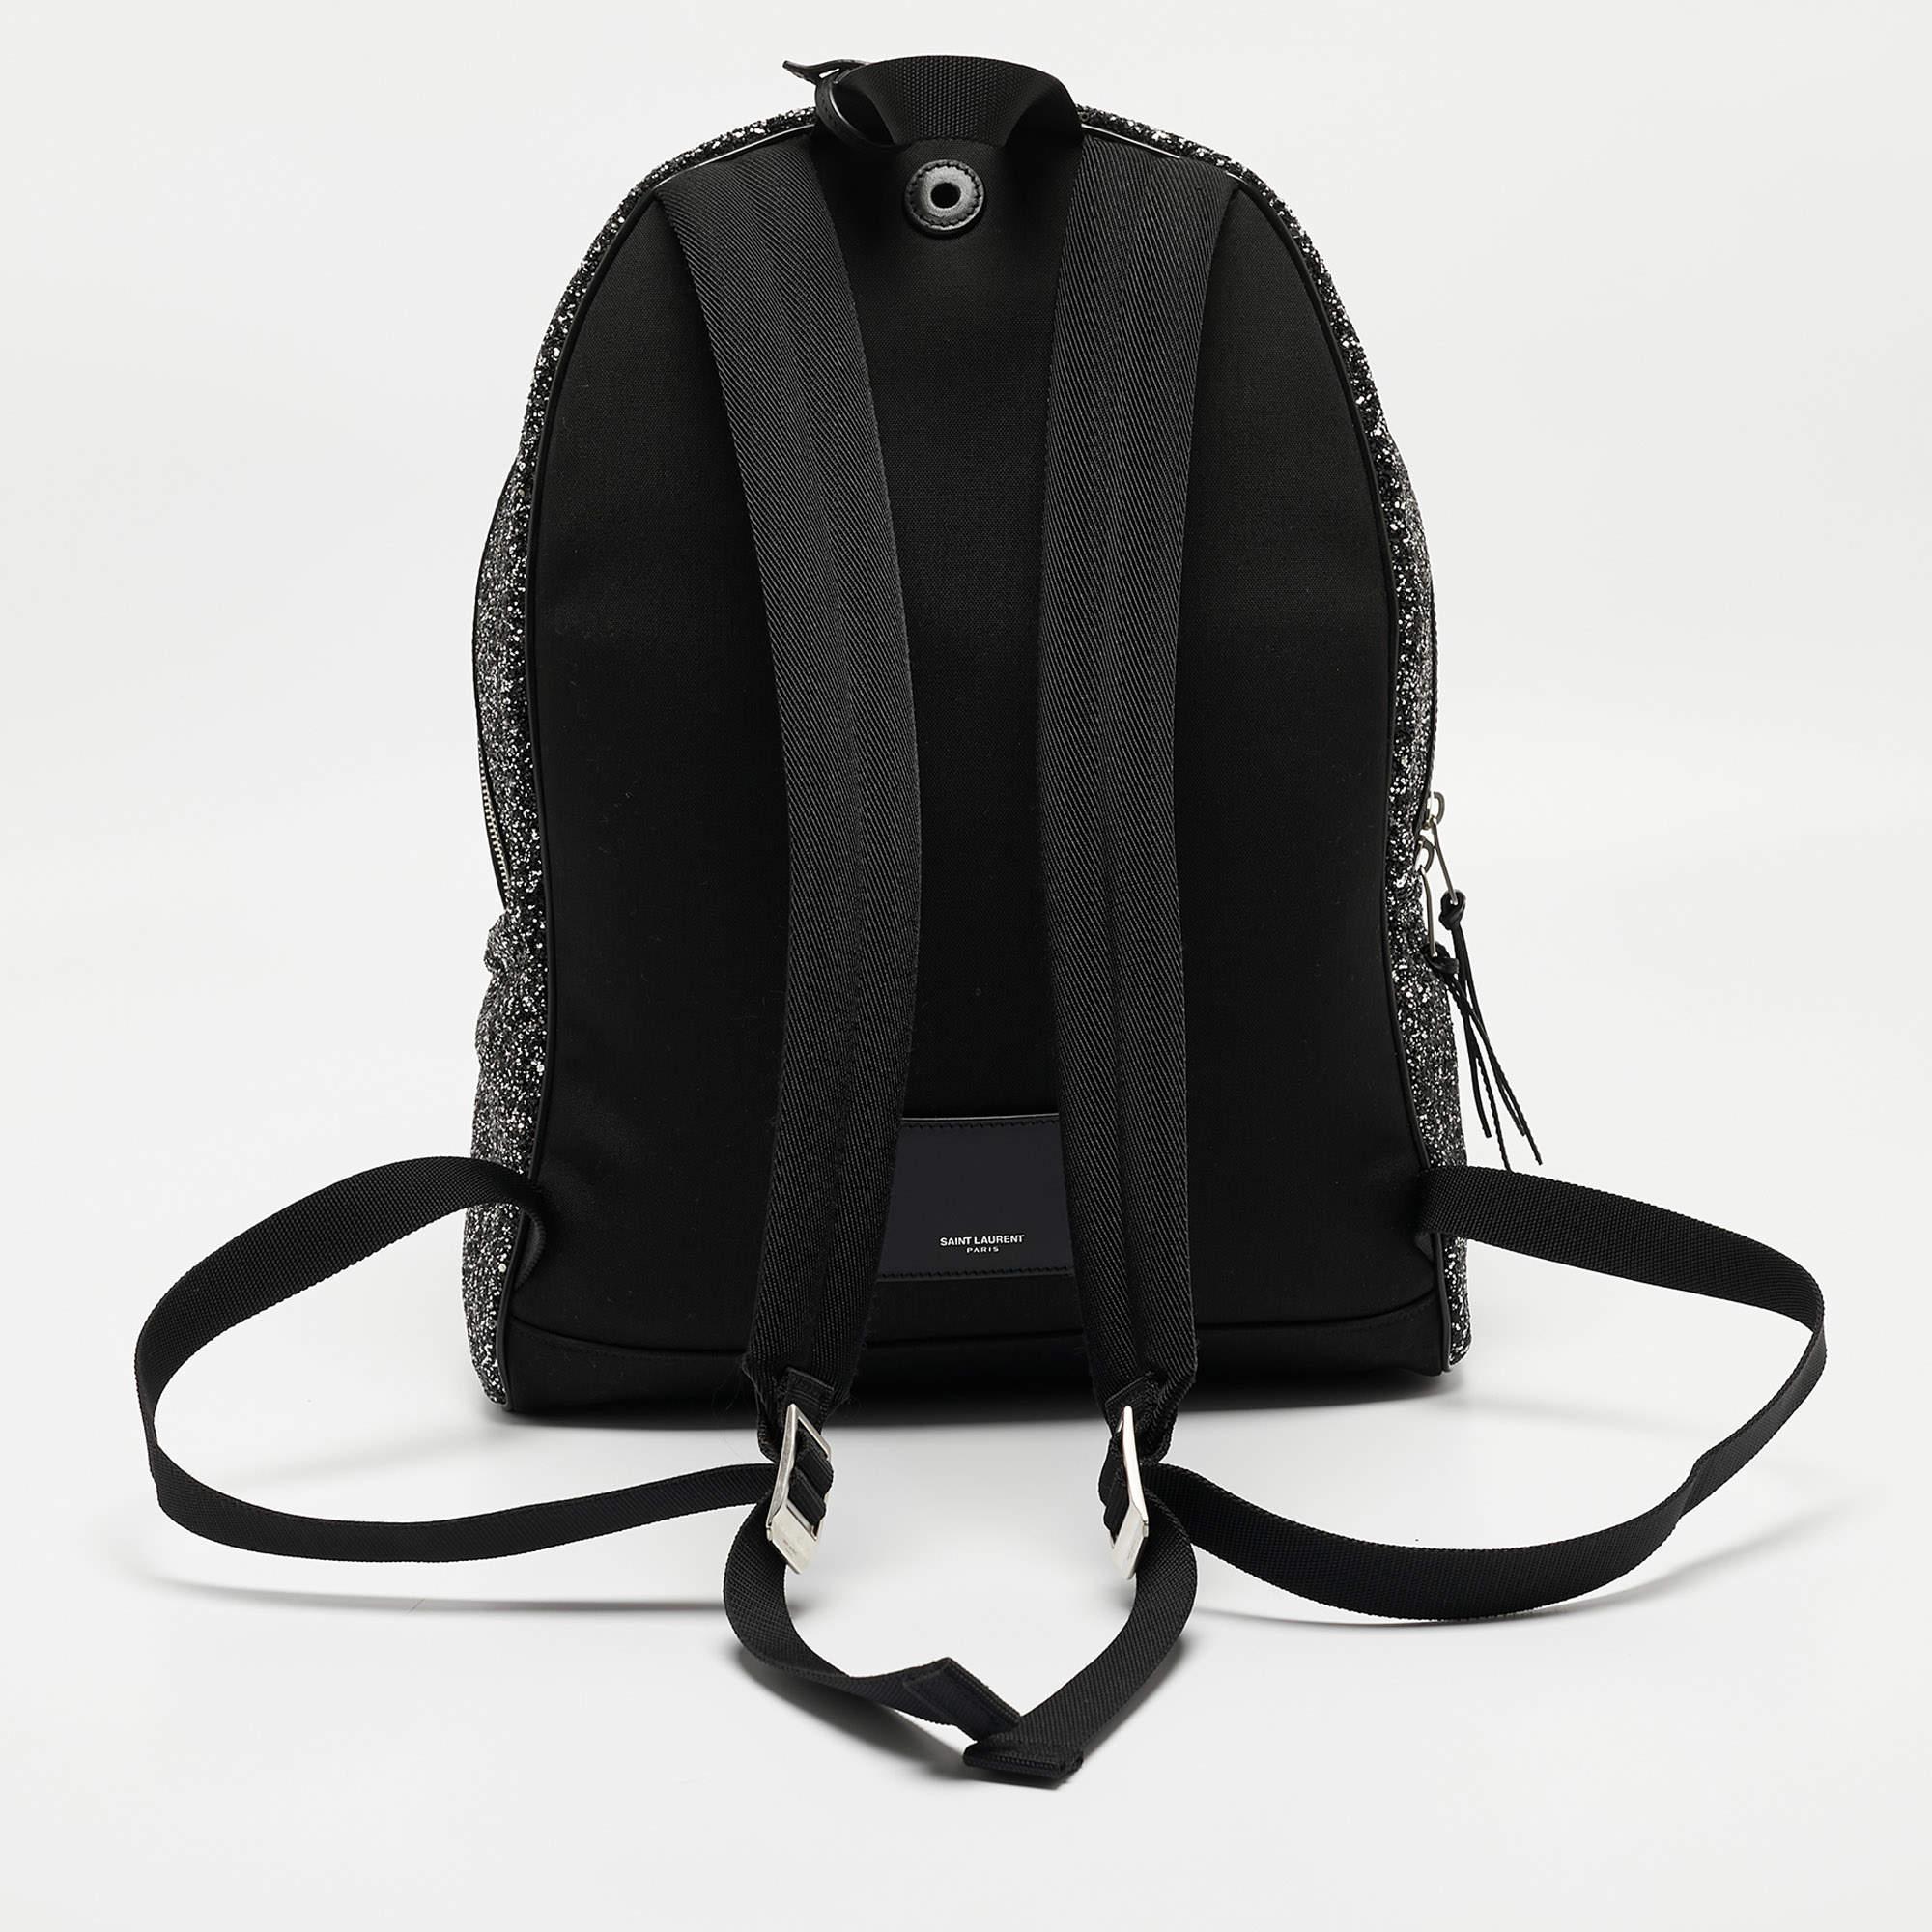 This practical and fashionable Saint Laurent backpack will come in handy for daily use or as a style statement. It is smartly designed with a spacious interior for your belongings. Two shoulder straps make it ready to be yours.

Includes: Original